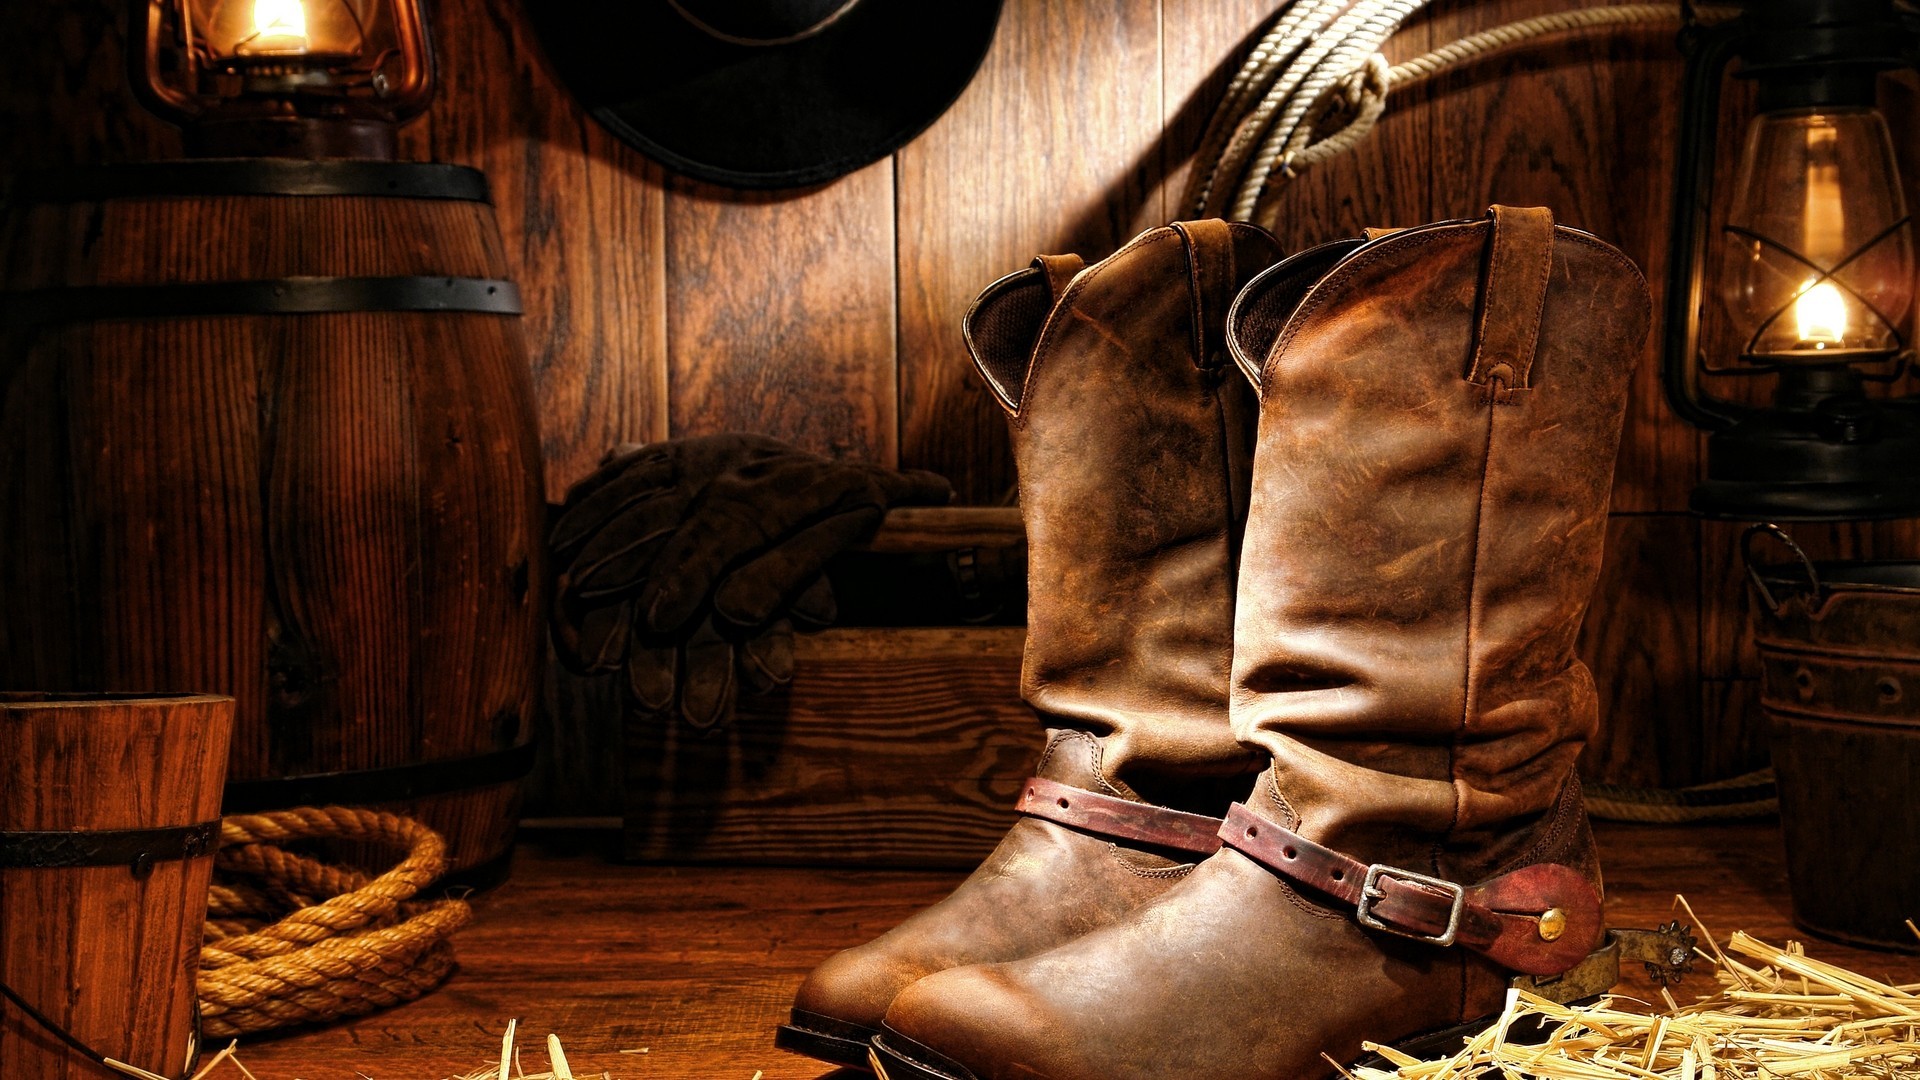 General 1920x1080 boots western shoes ropes hay wooden surface barrels lantern warm colors brown